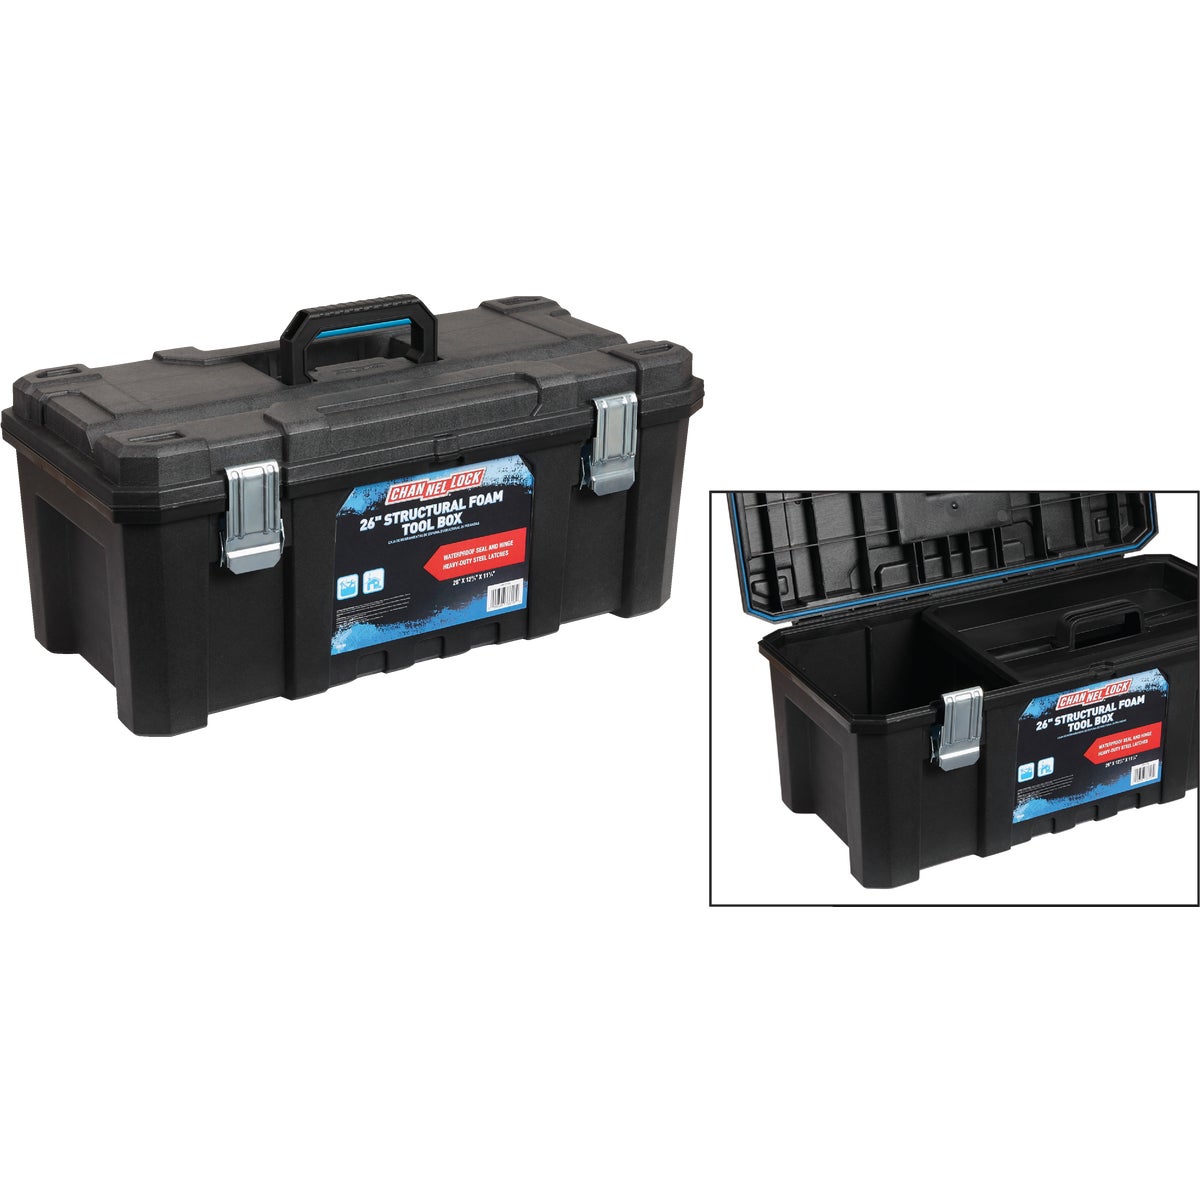 Channellock 26 In. Structural Foam Toolbox